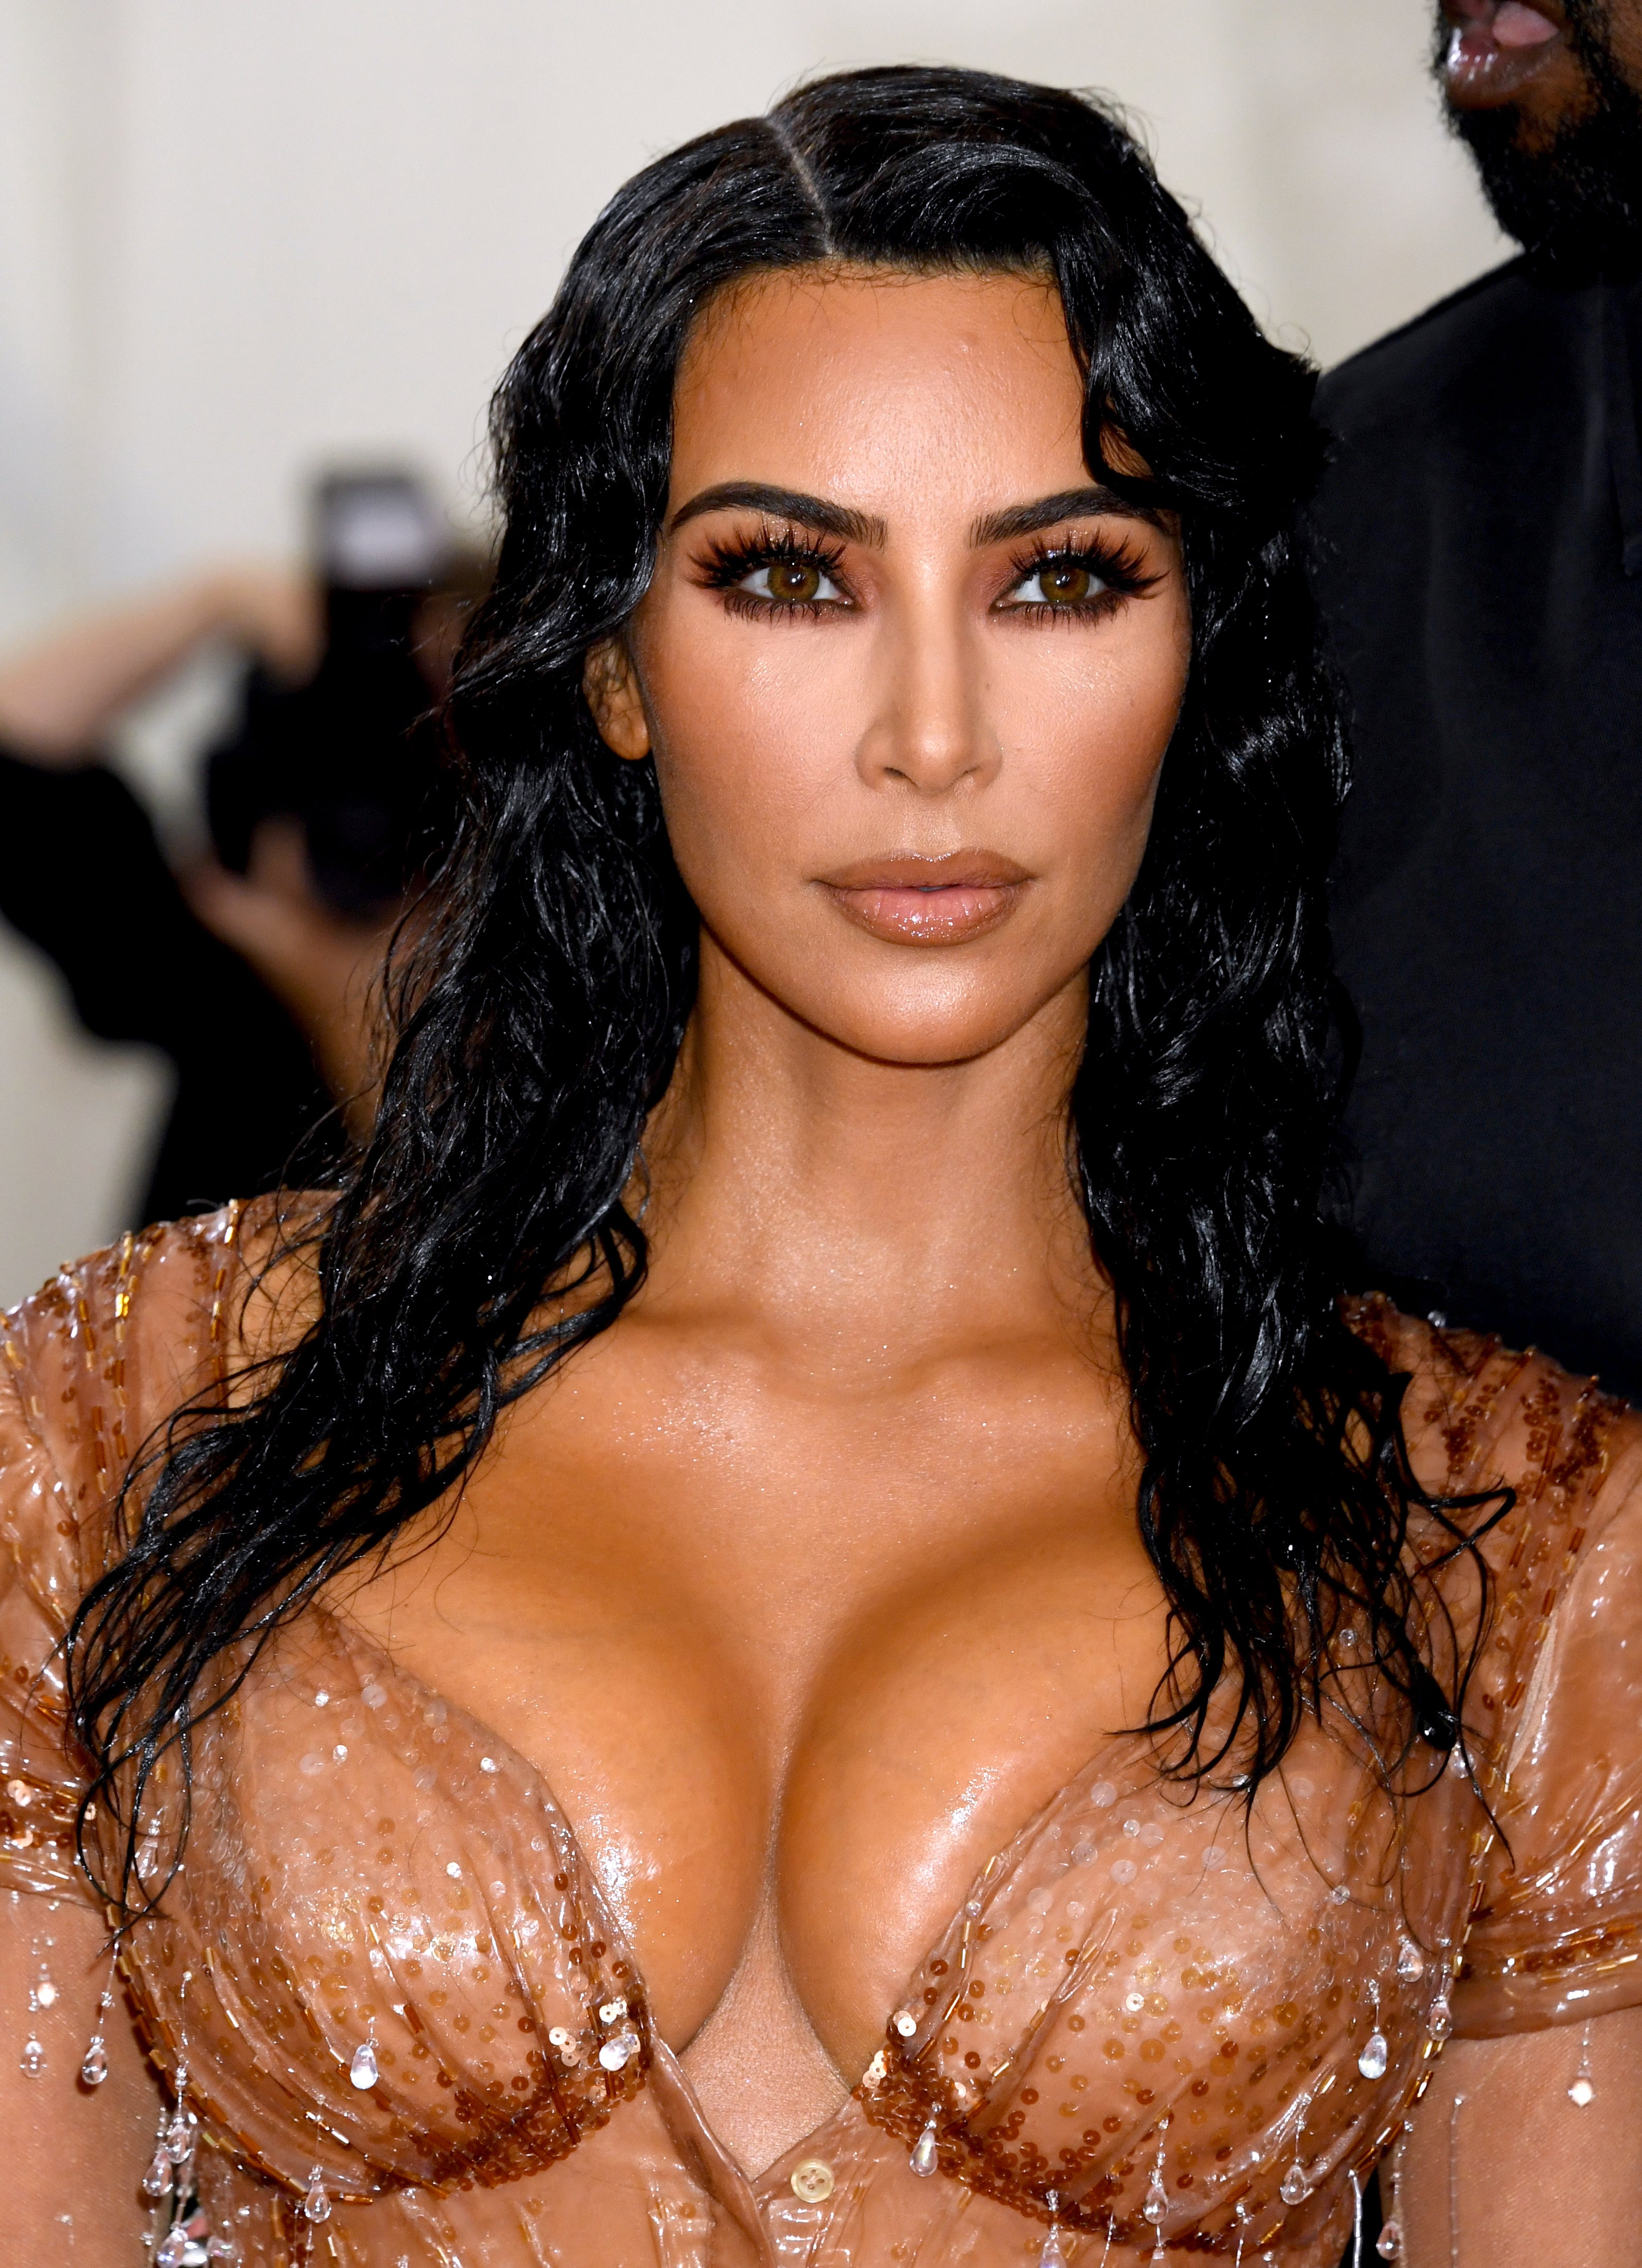 Kim Kardashian has been told to stop talking about truck driver’s 100-year sentence